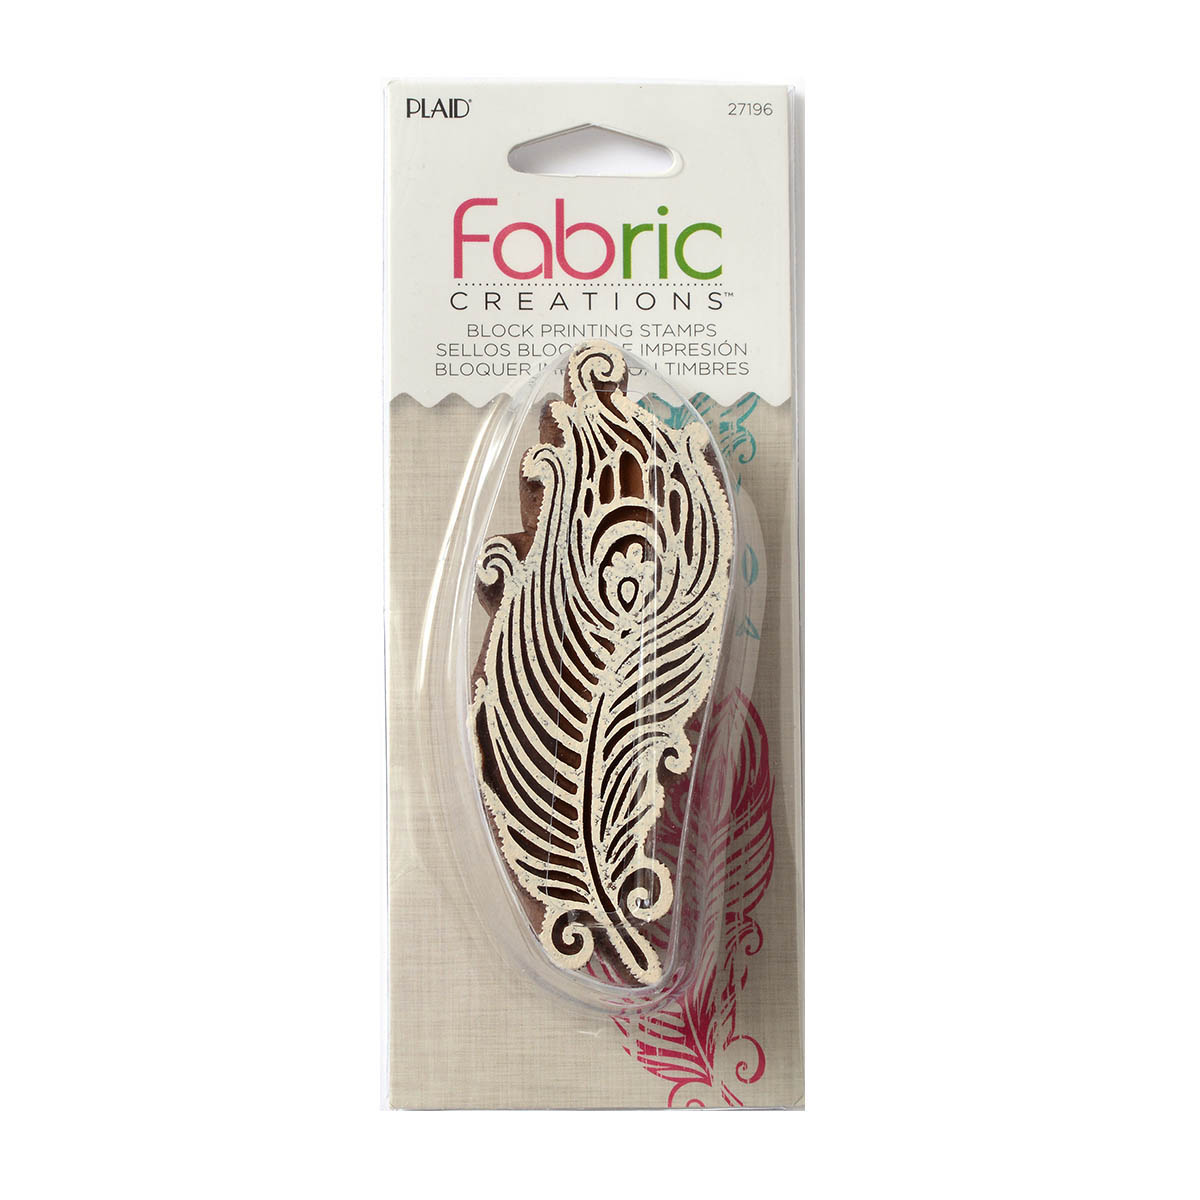 Fabric Creations™ Block Printing Stamps - Border - Feather